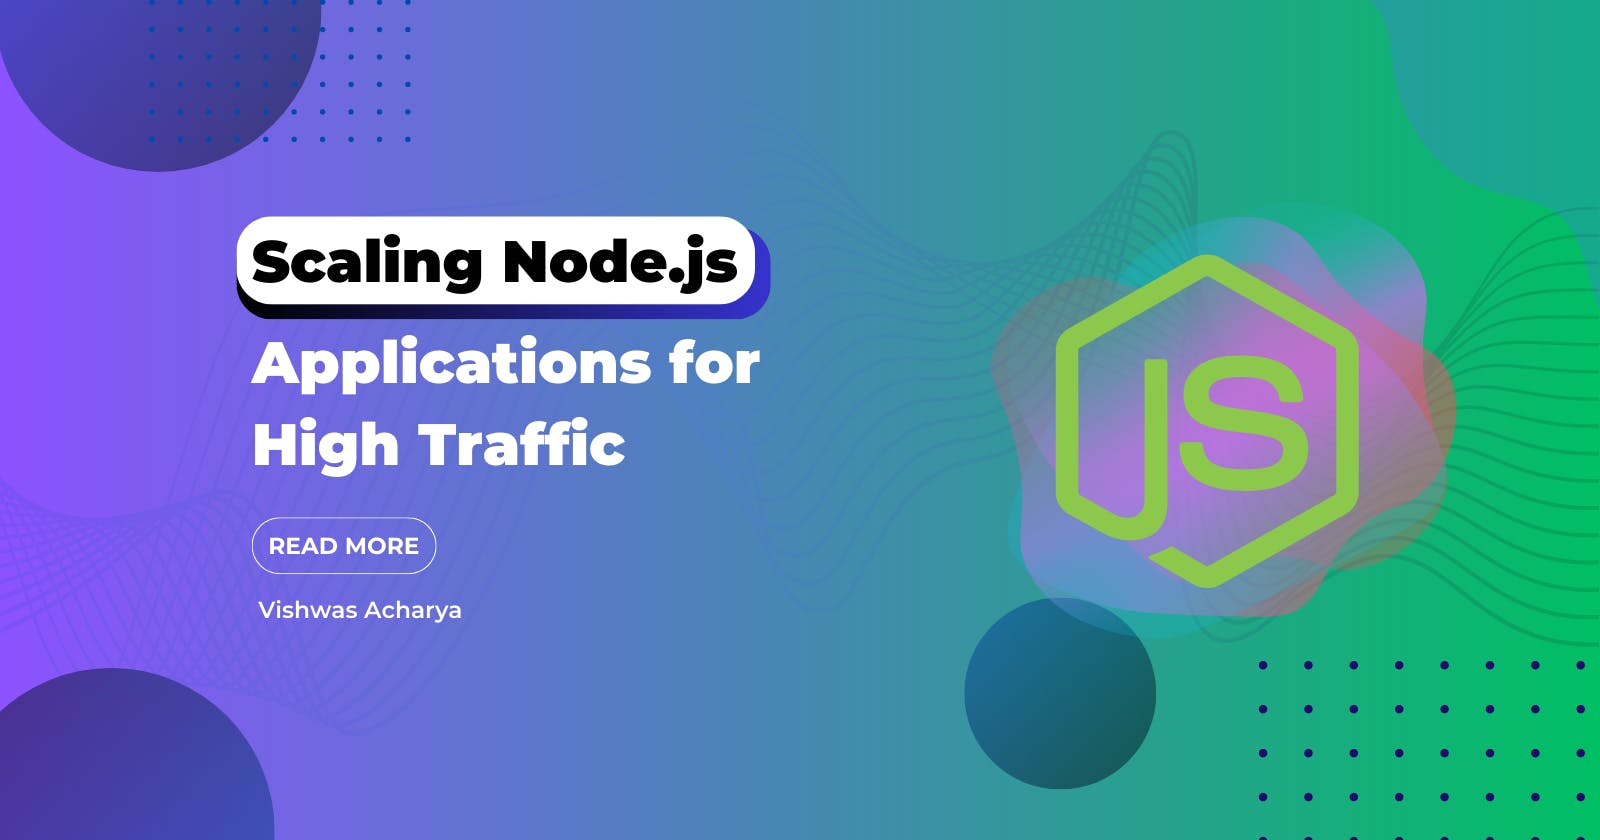 Scaling Node.js Applications for High Traffic